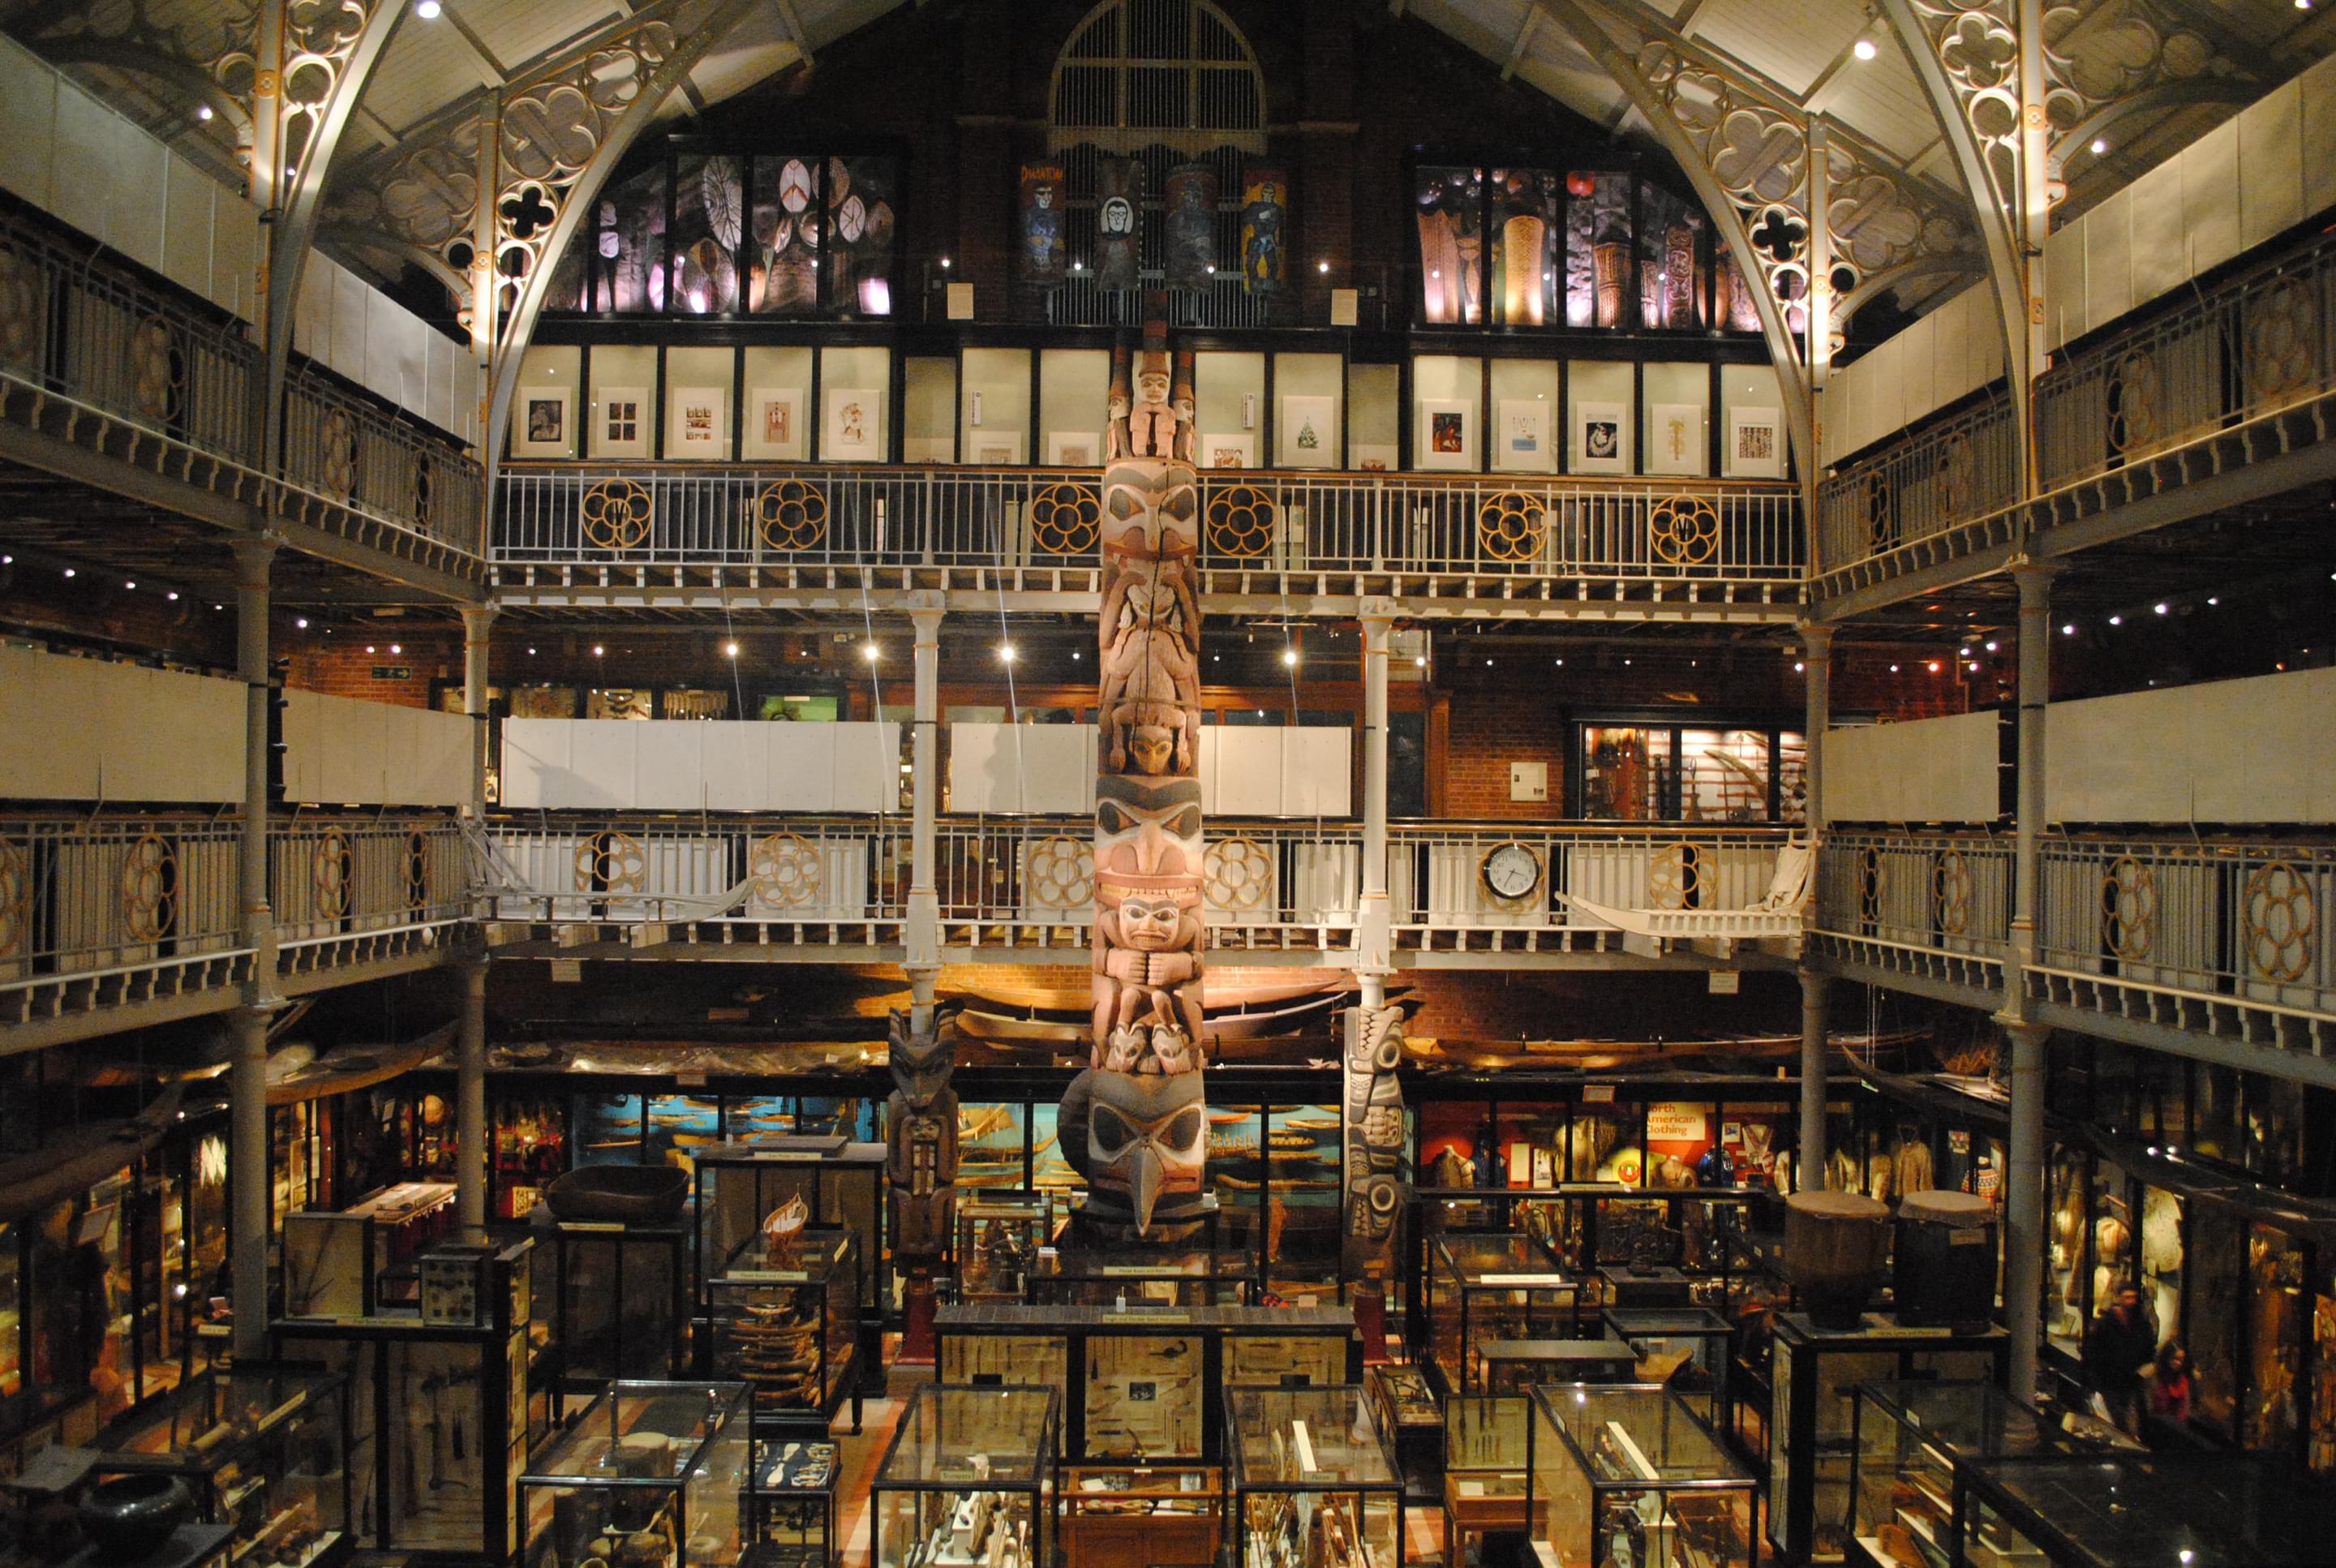 The Pitt Rivers Museum Overview